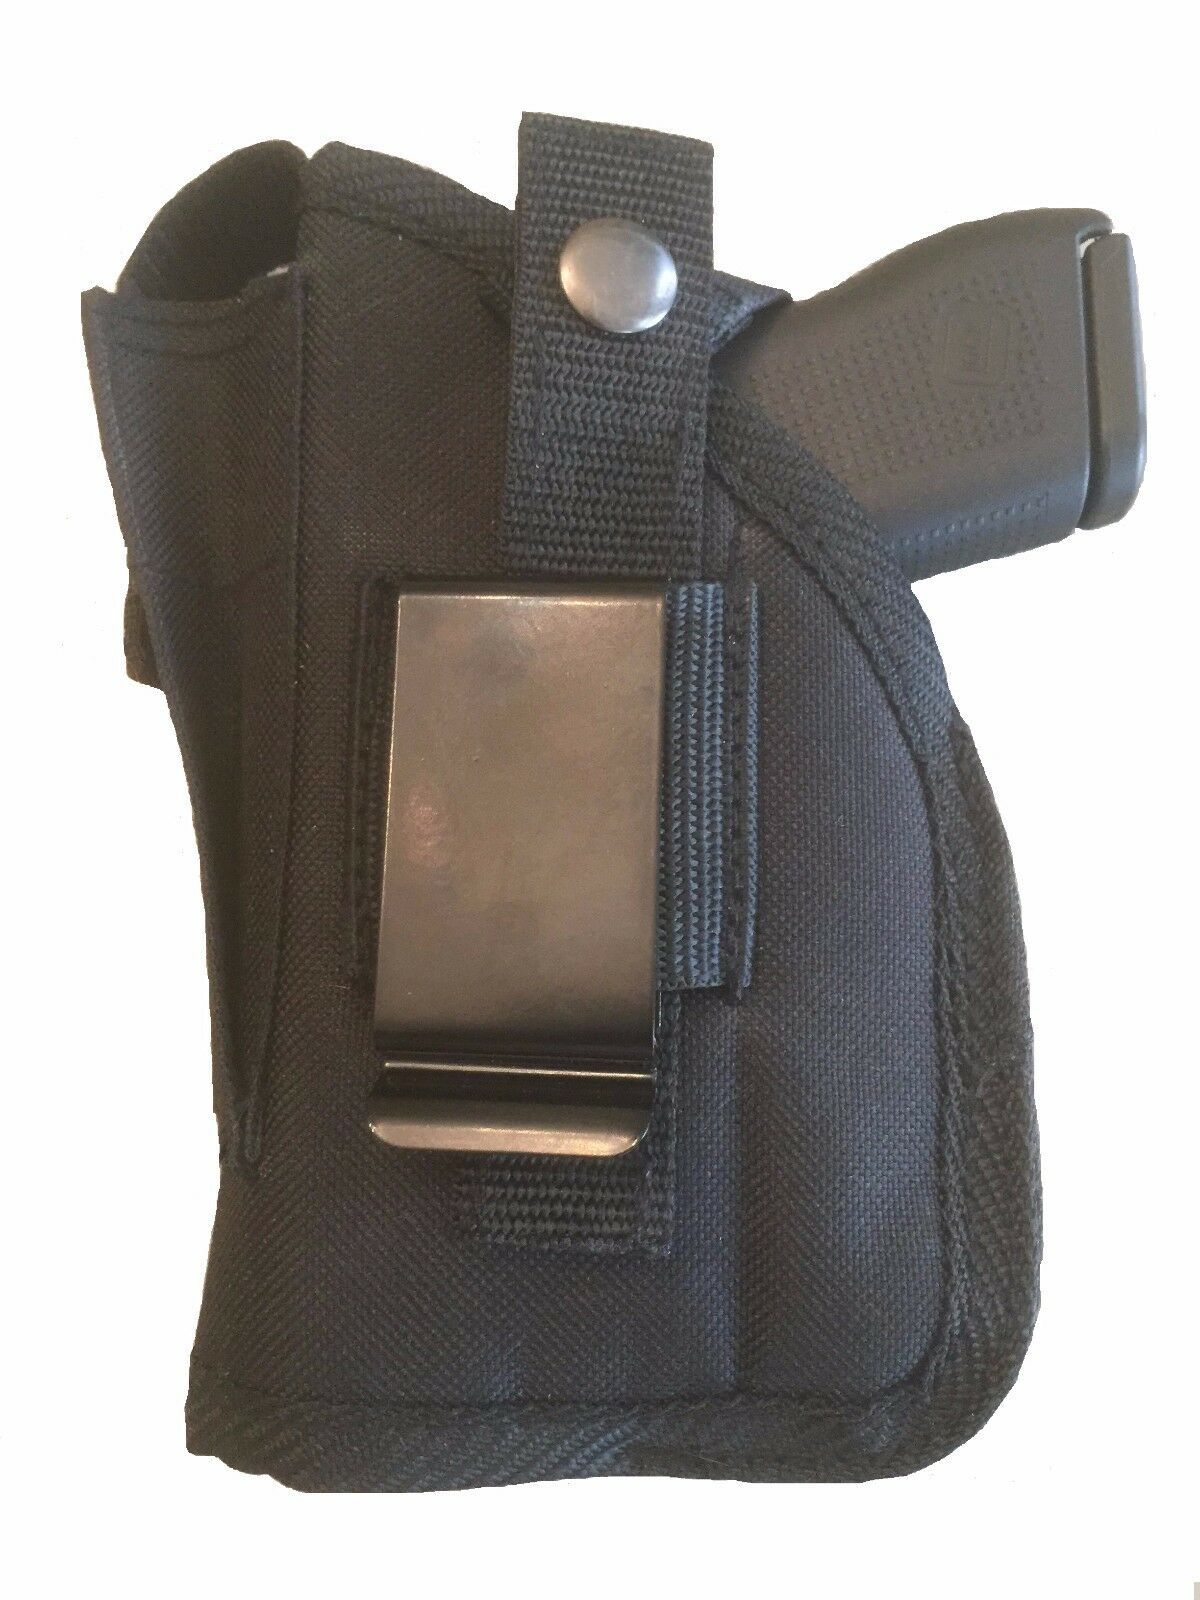 Nylon Gun Holster With Magazine Pouch For Browning BDA 380.